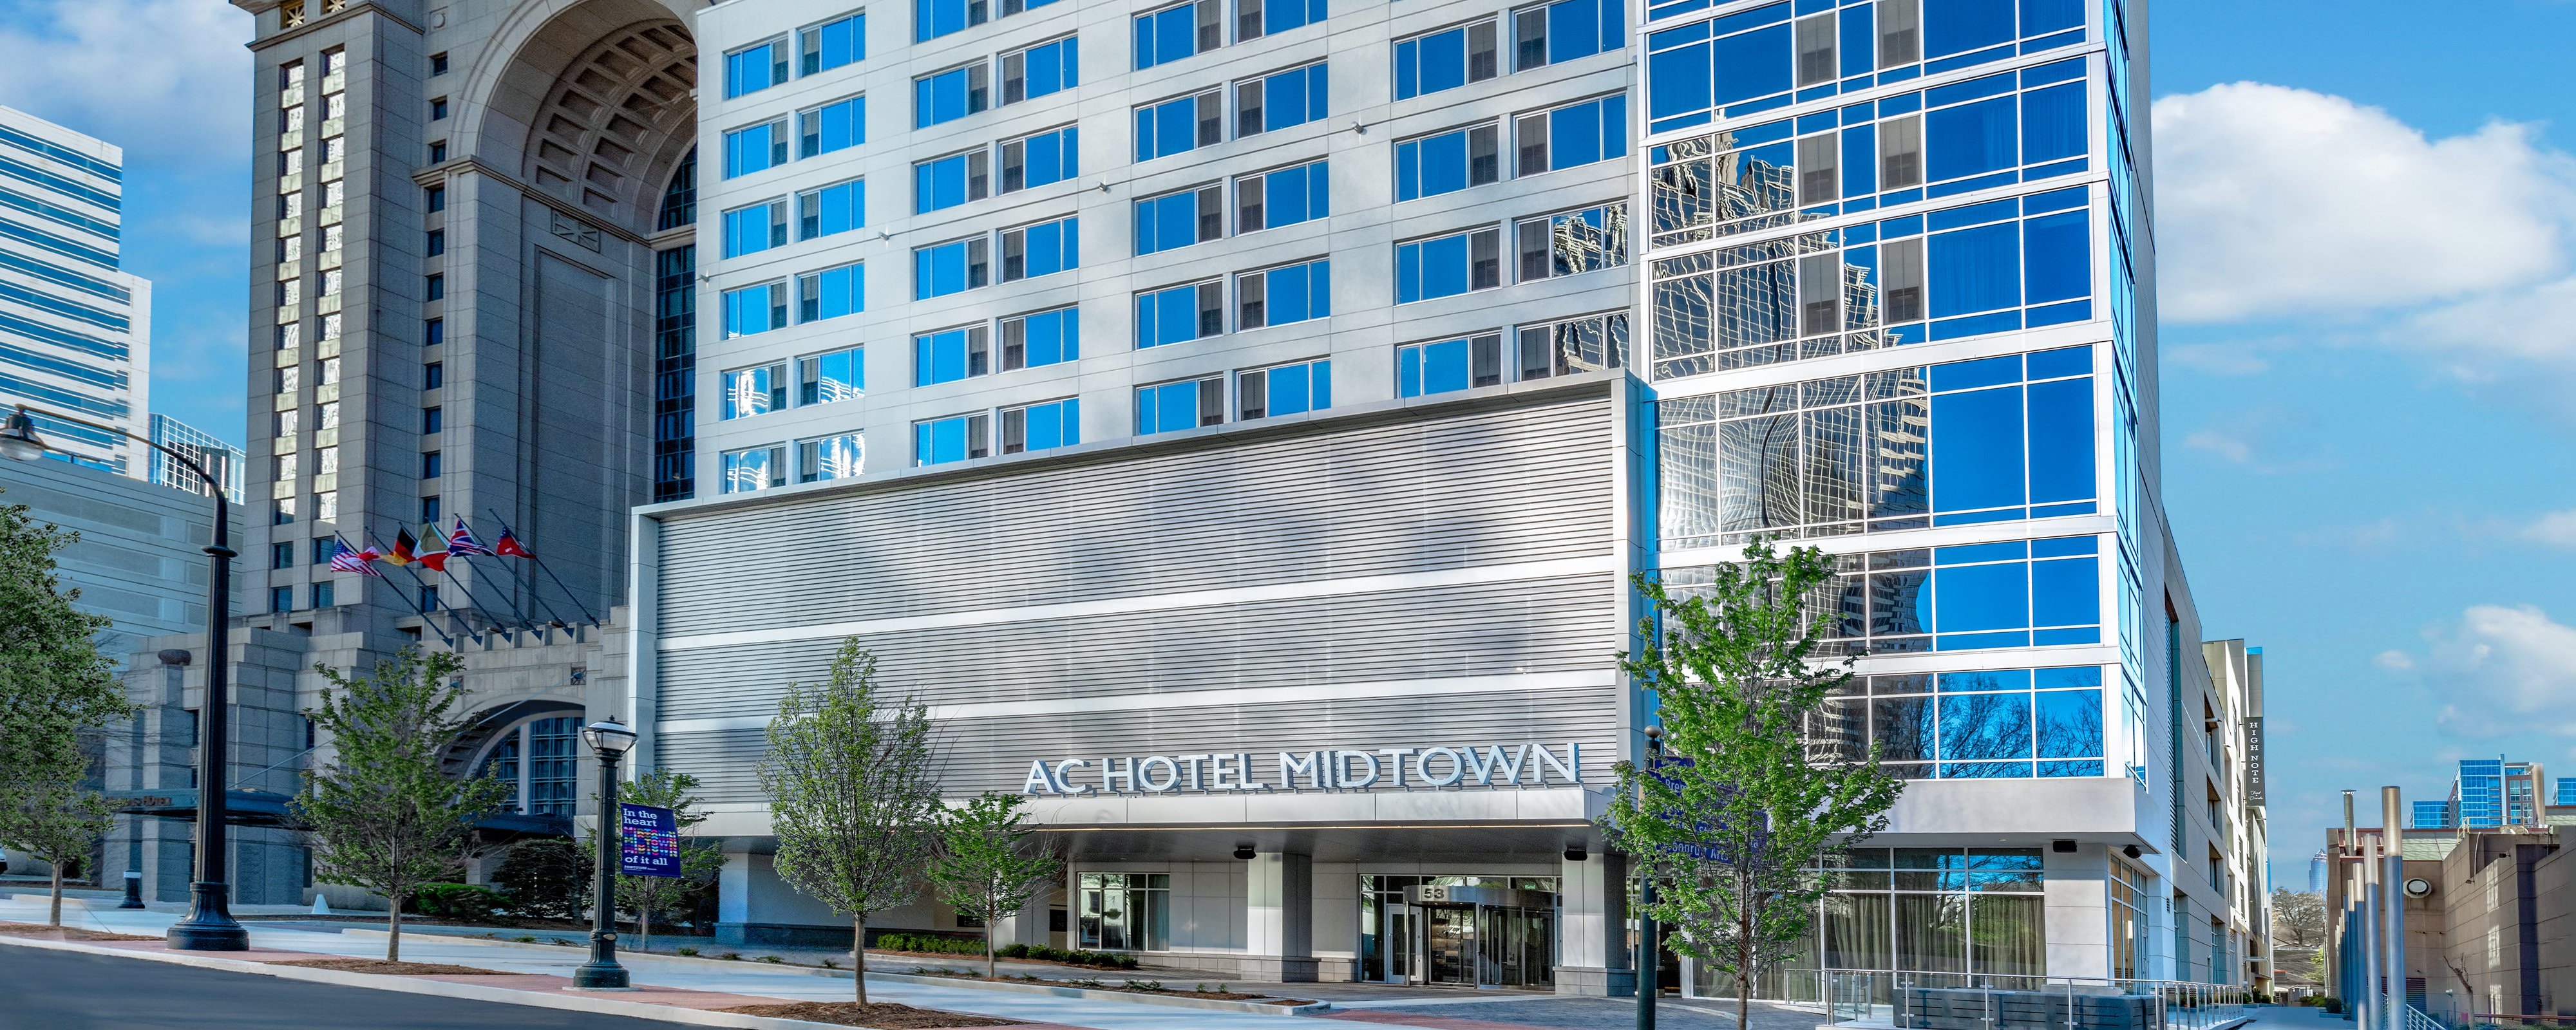 discount-75-off-quality-inn-midtown-united-states-4-hotel-near